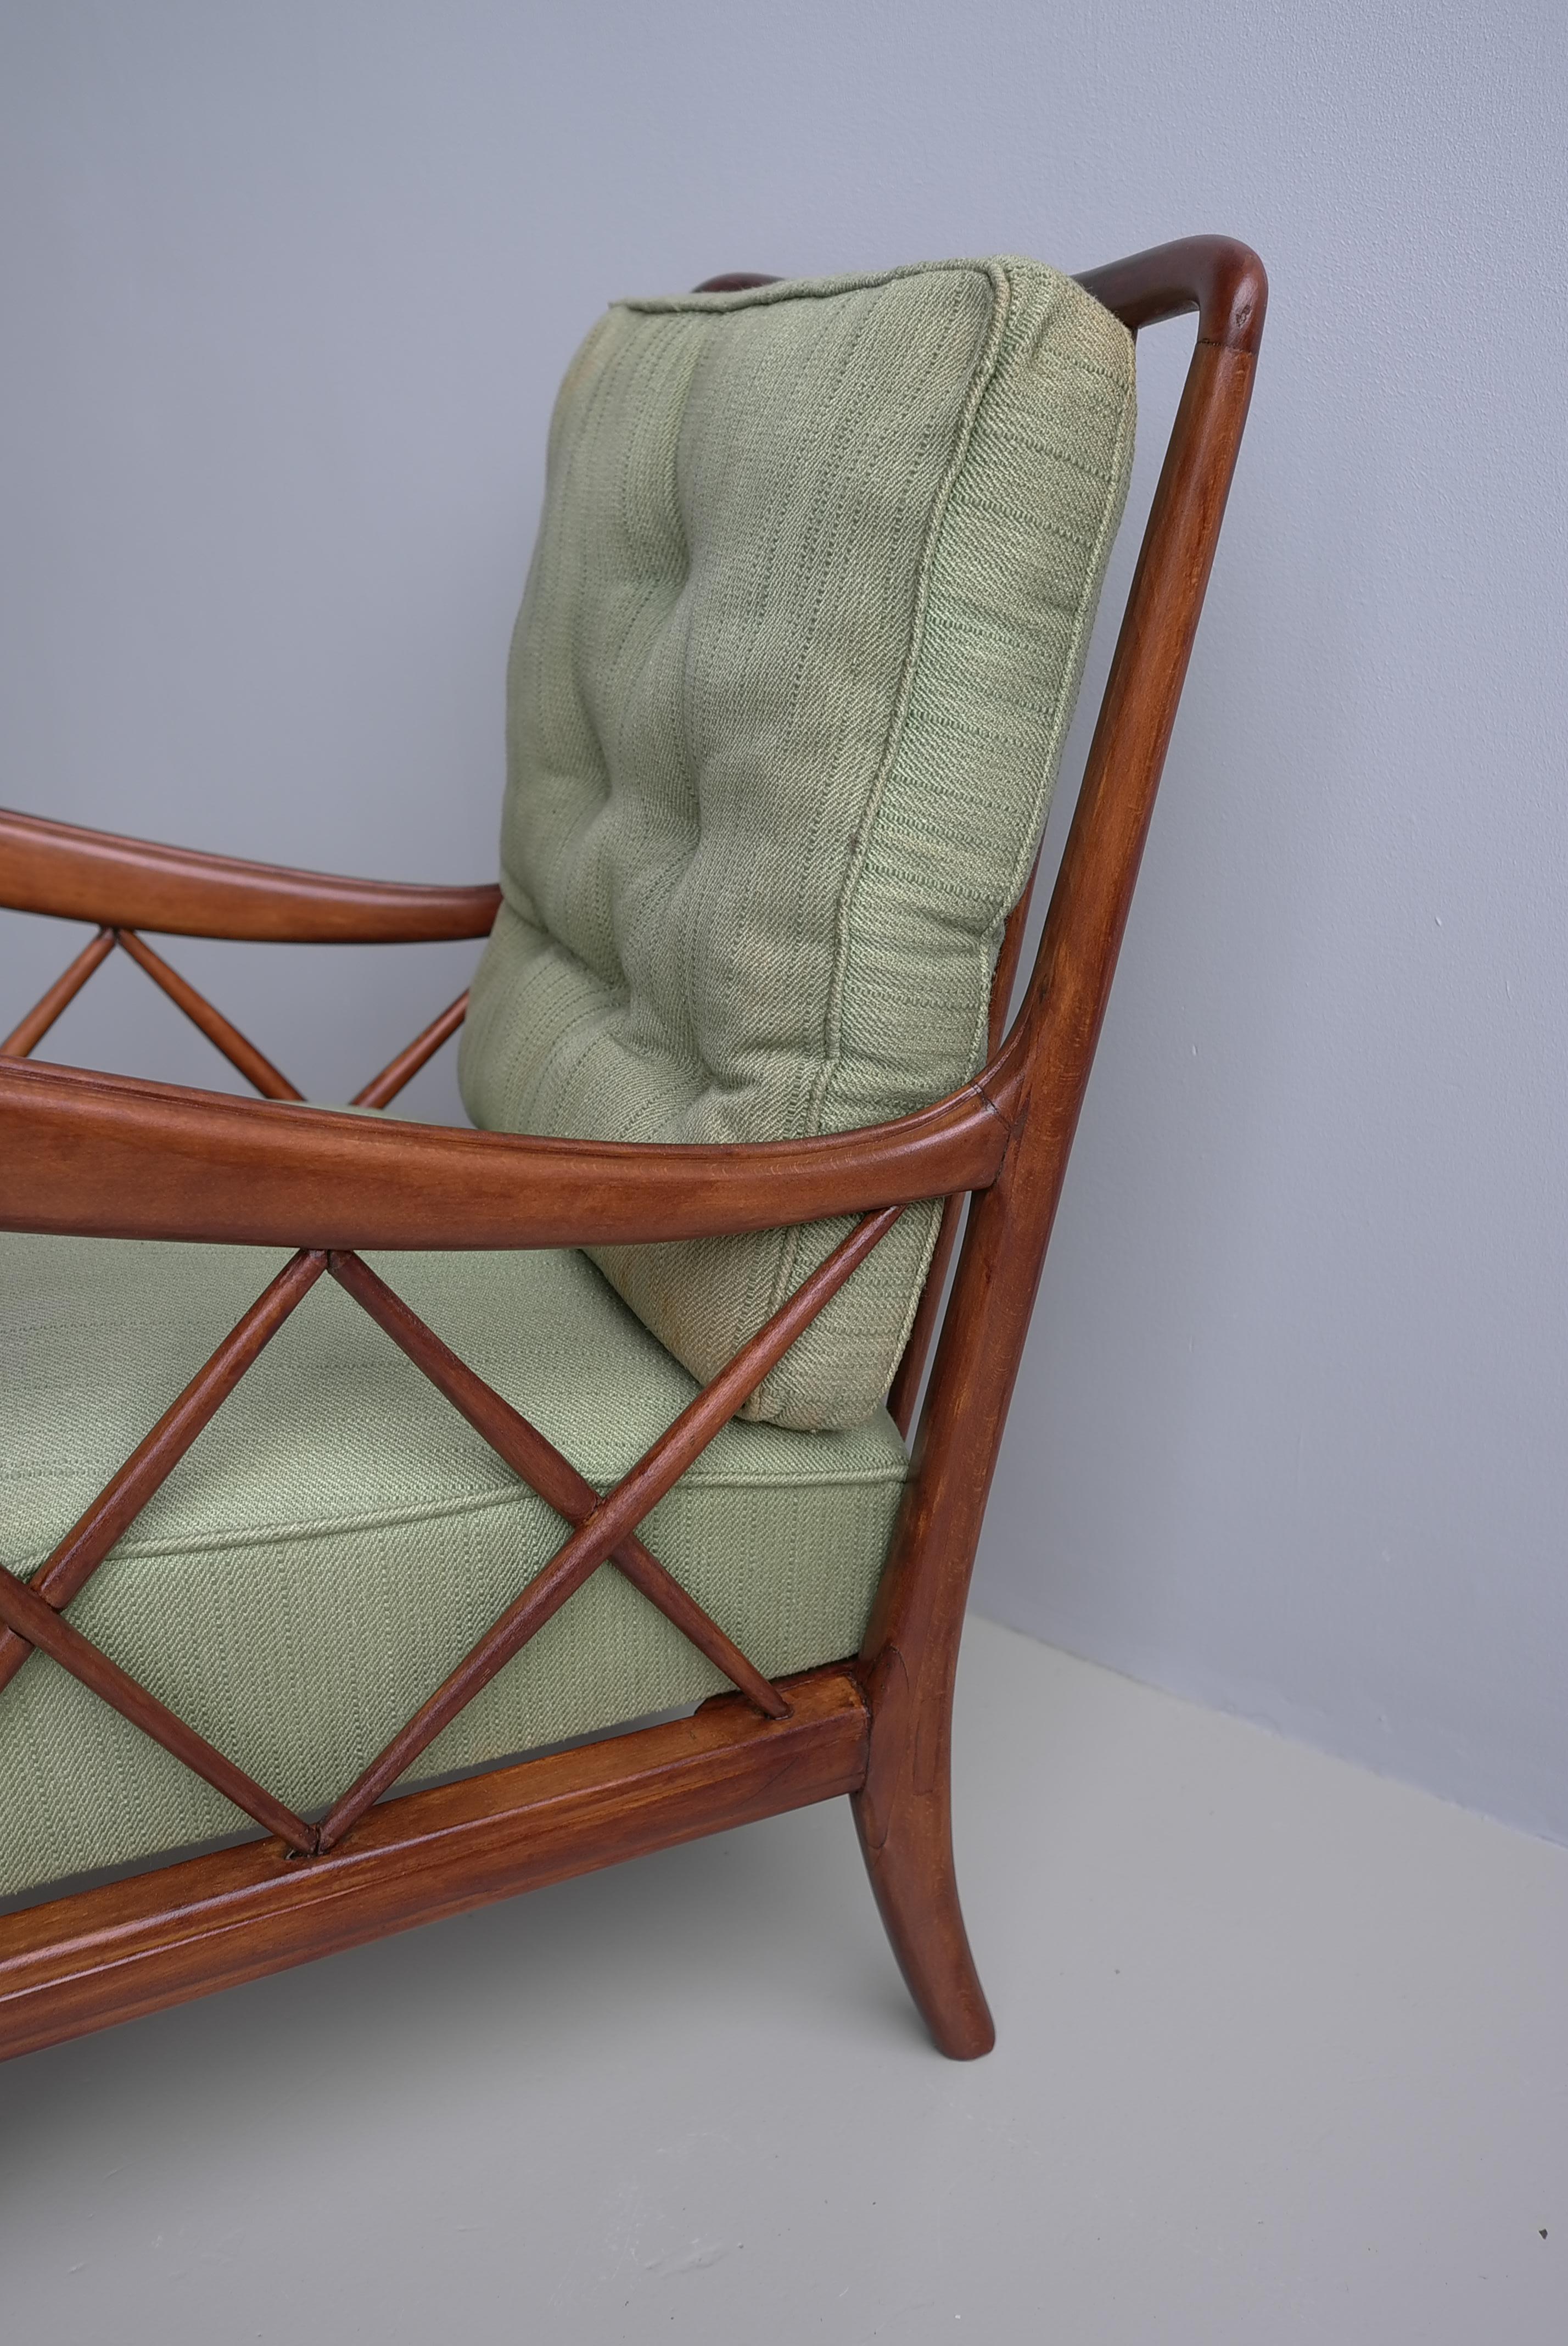 Italian Walnut Wooden Lounge Chairs attr Paolo Buffa, Milan Italy 1940's For Sale